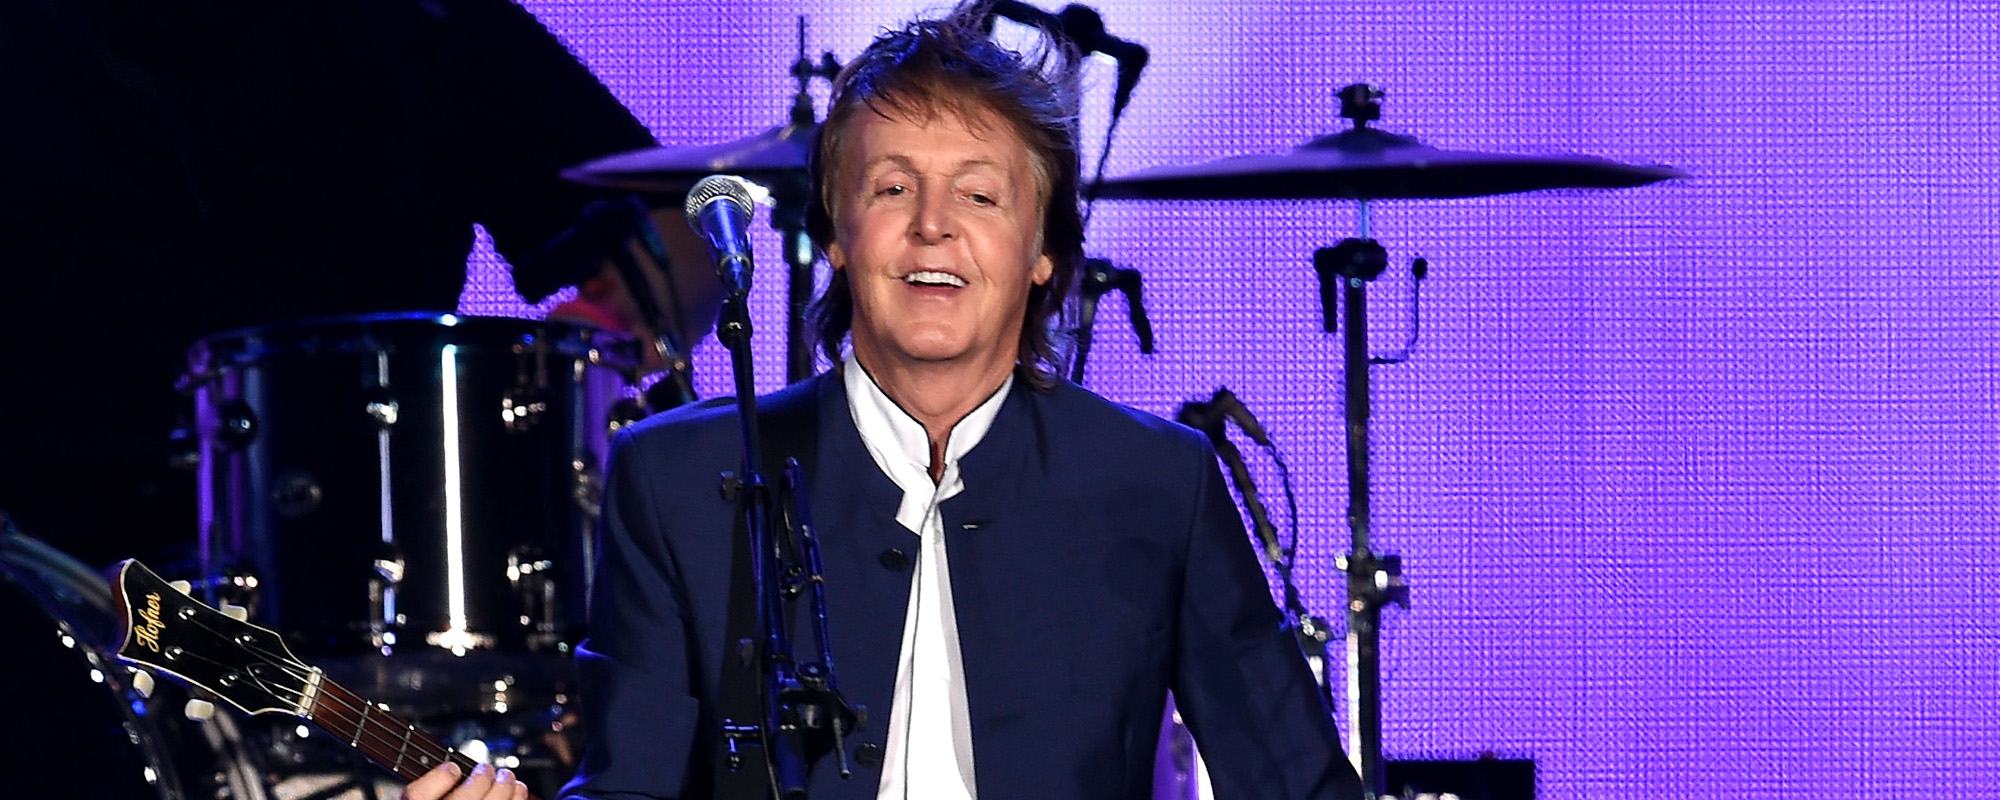 The Meaning Behind “Coming Up” by Paul McCartney and How It Lit a Fire Under John Lennon